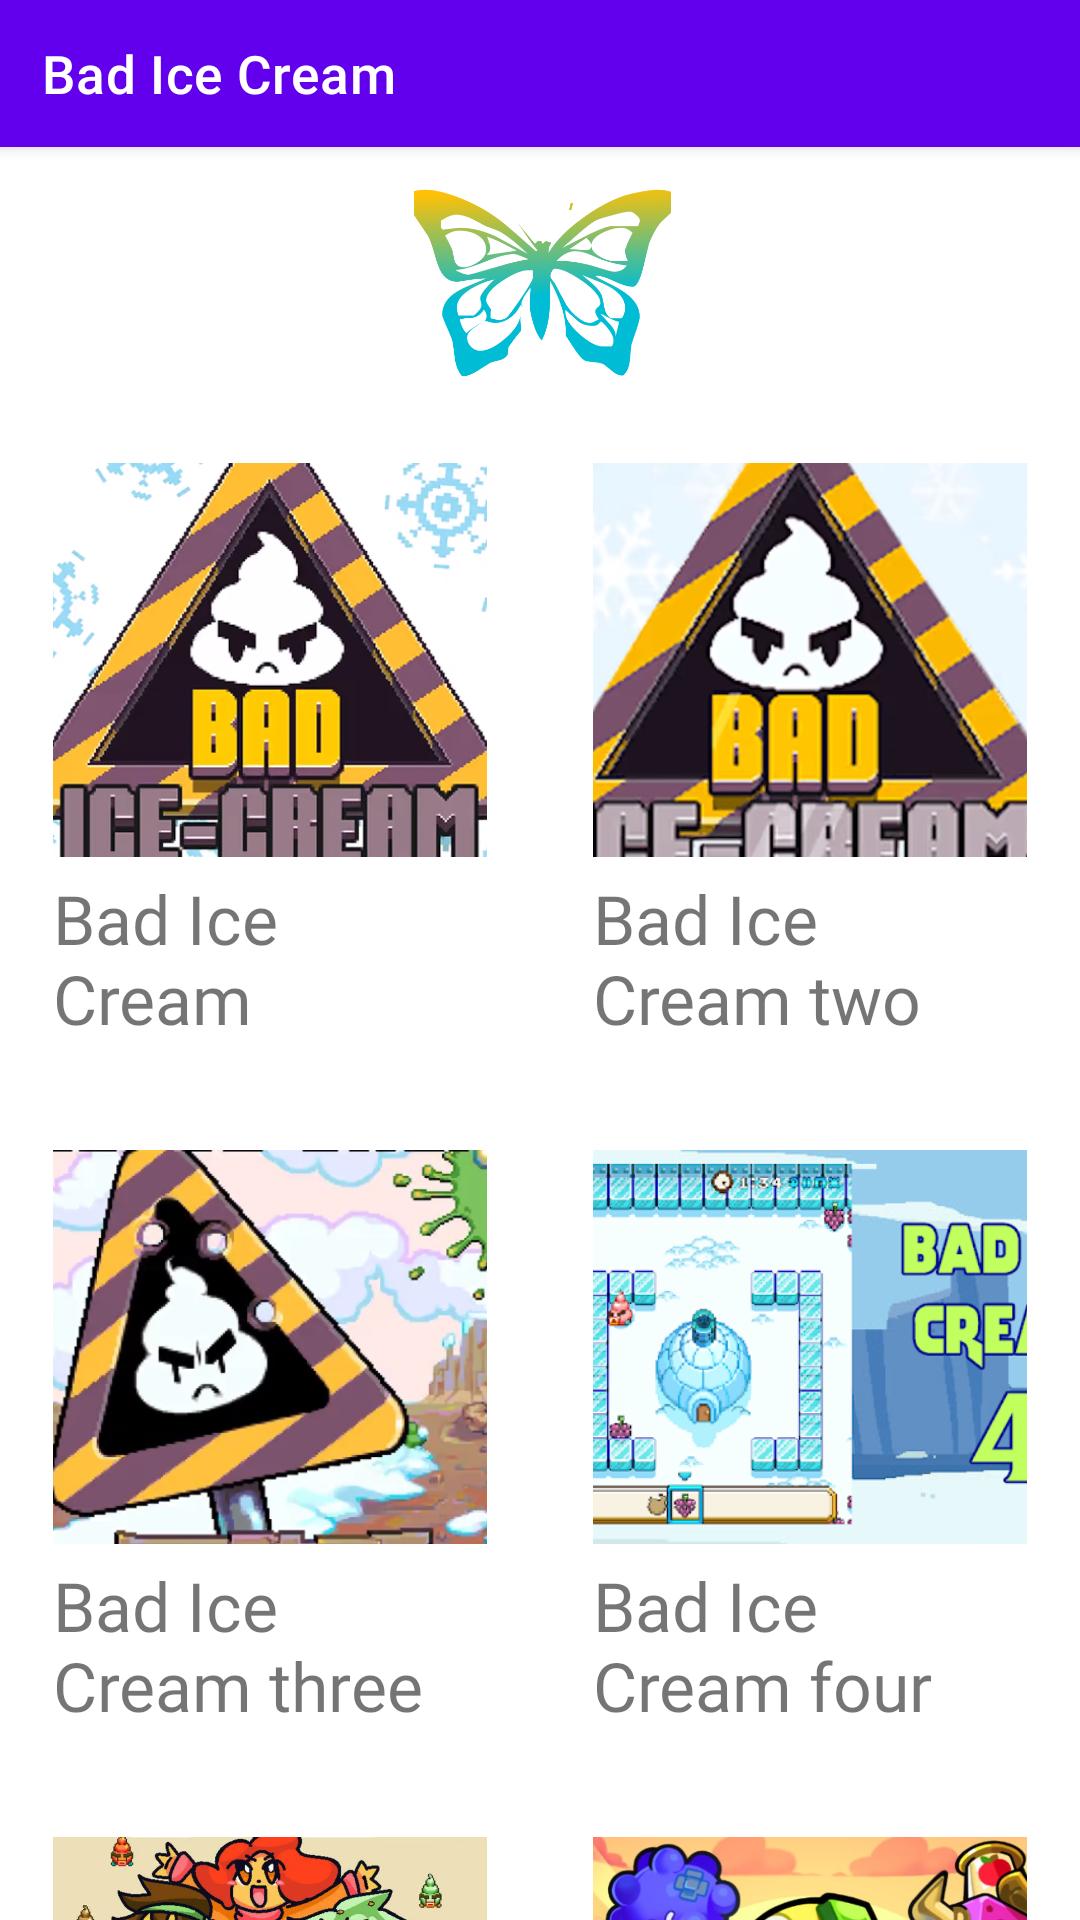 Bad Ice Cream 3 APK (Android Game) - Free Download